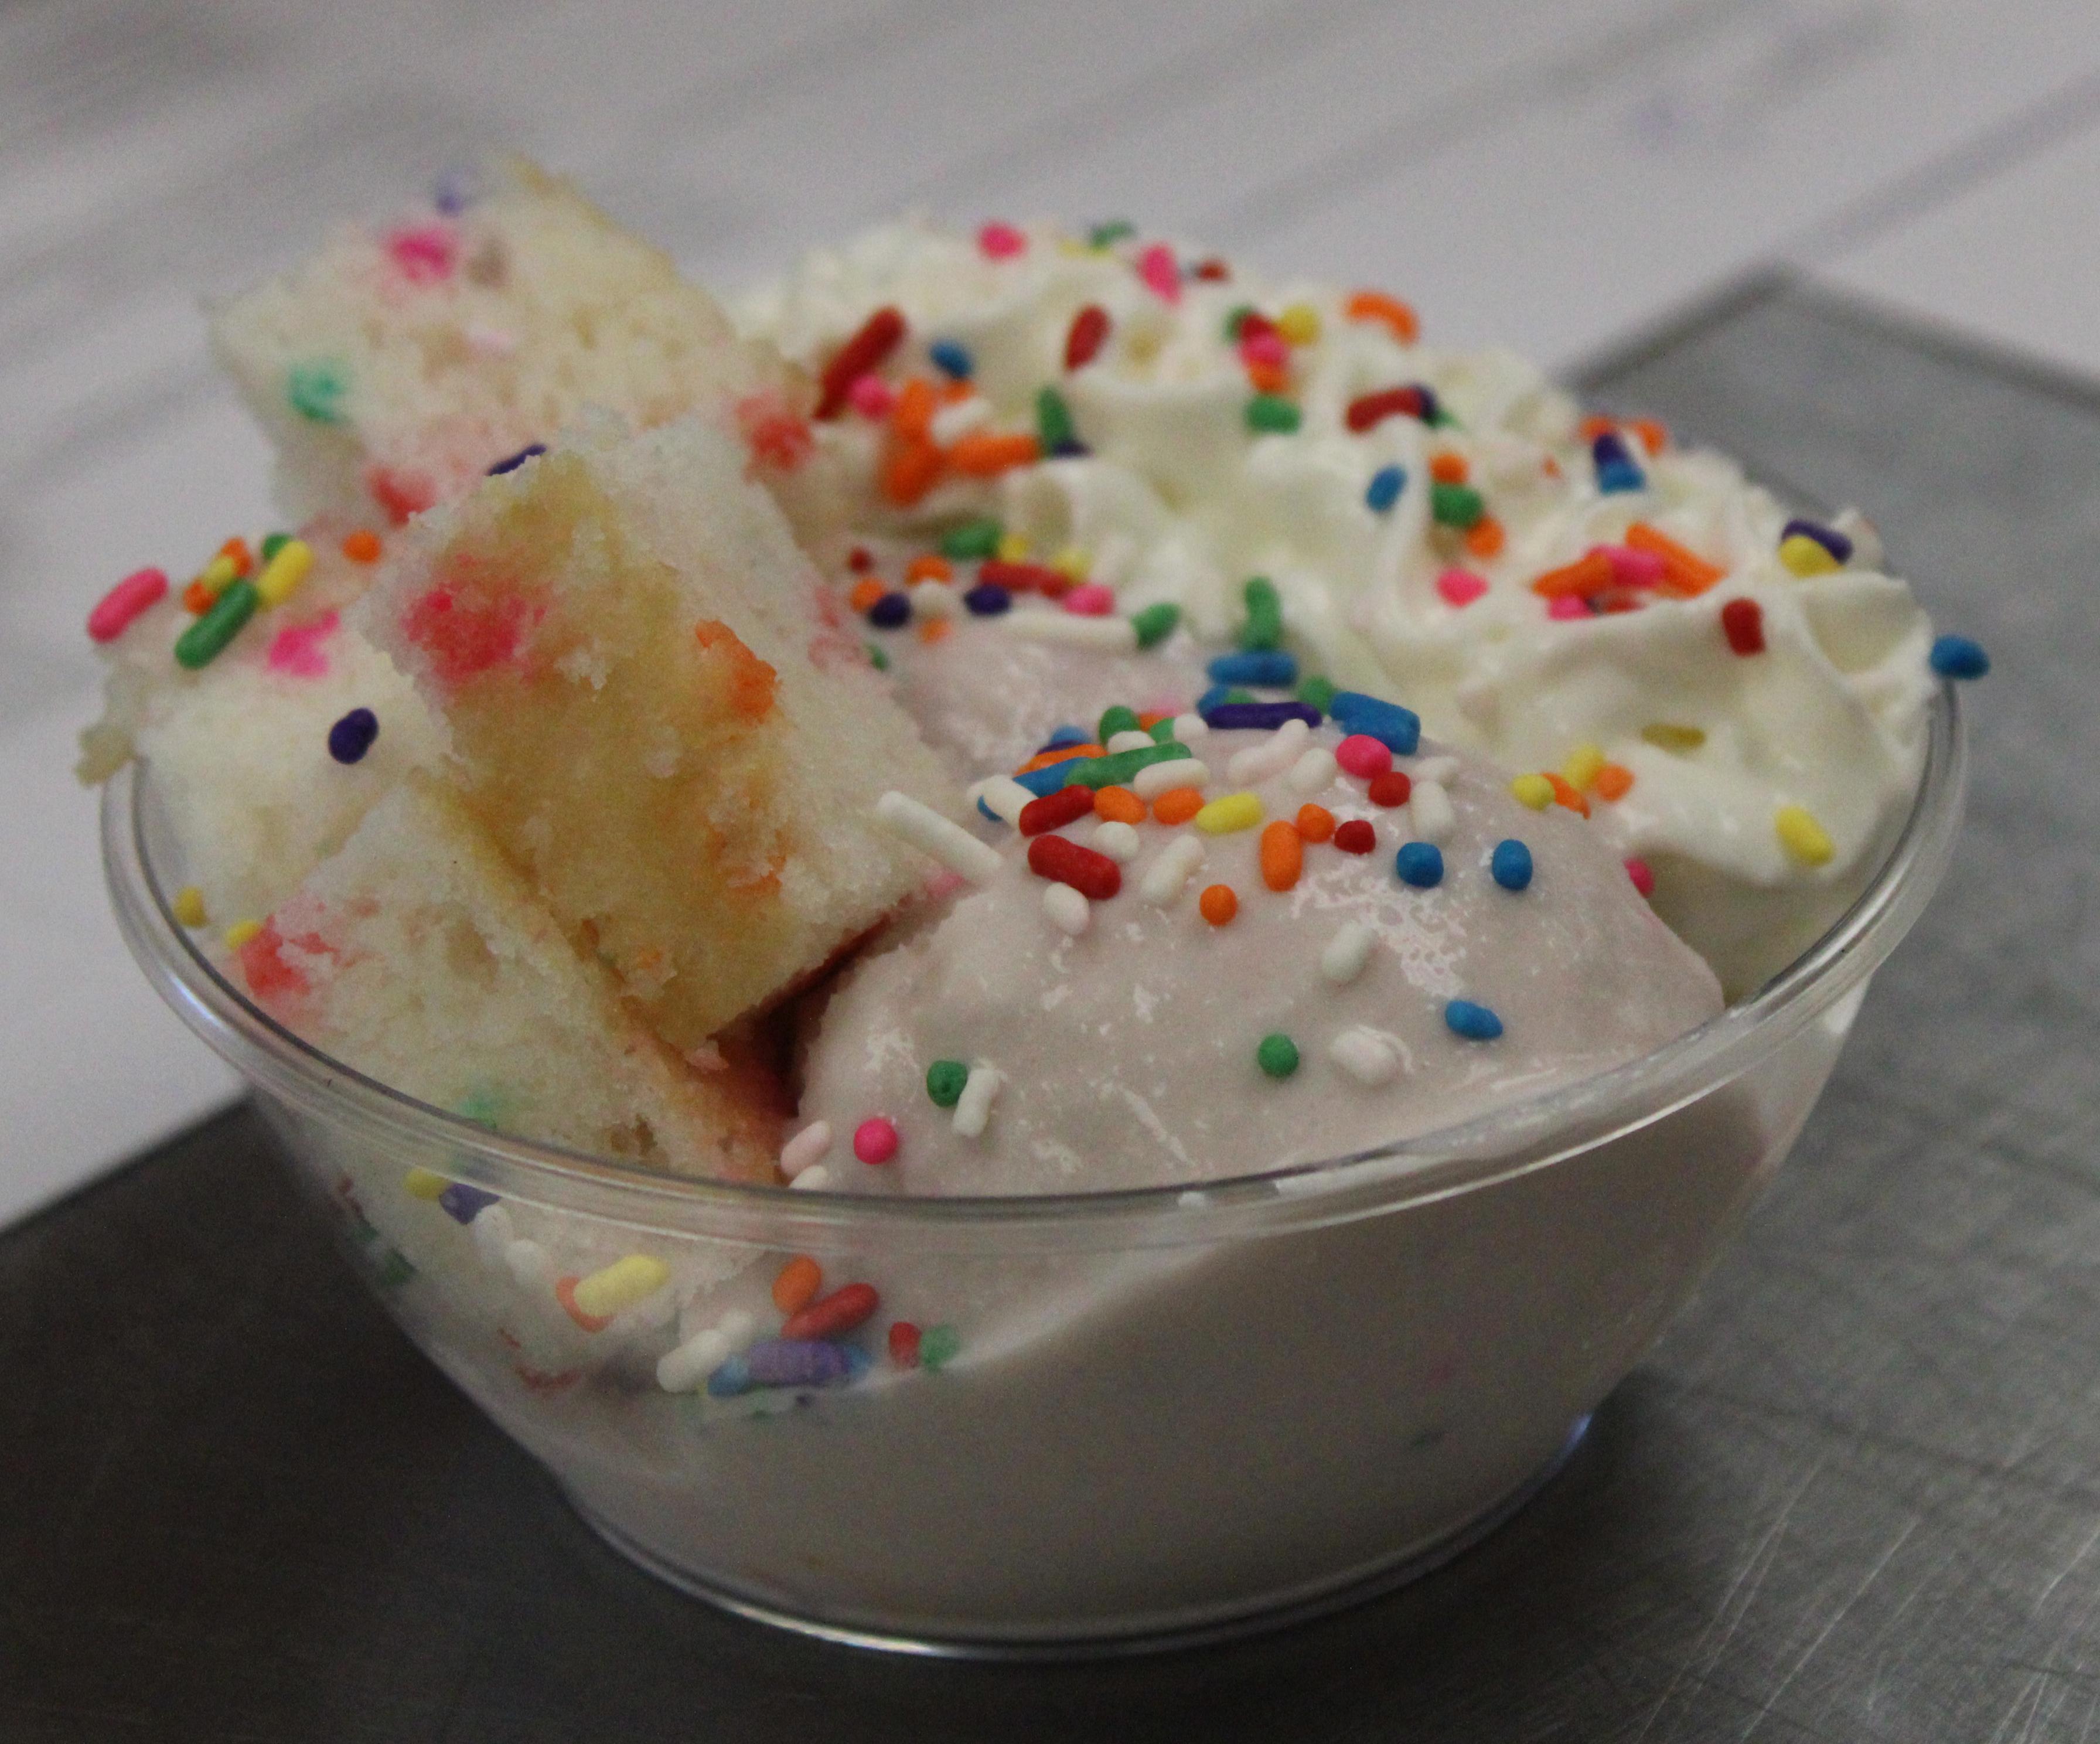 Willowbrook culinary students showcase skills during Ice Cream Creation Project final exam